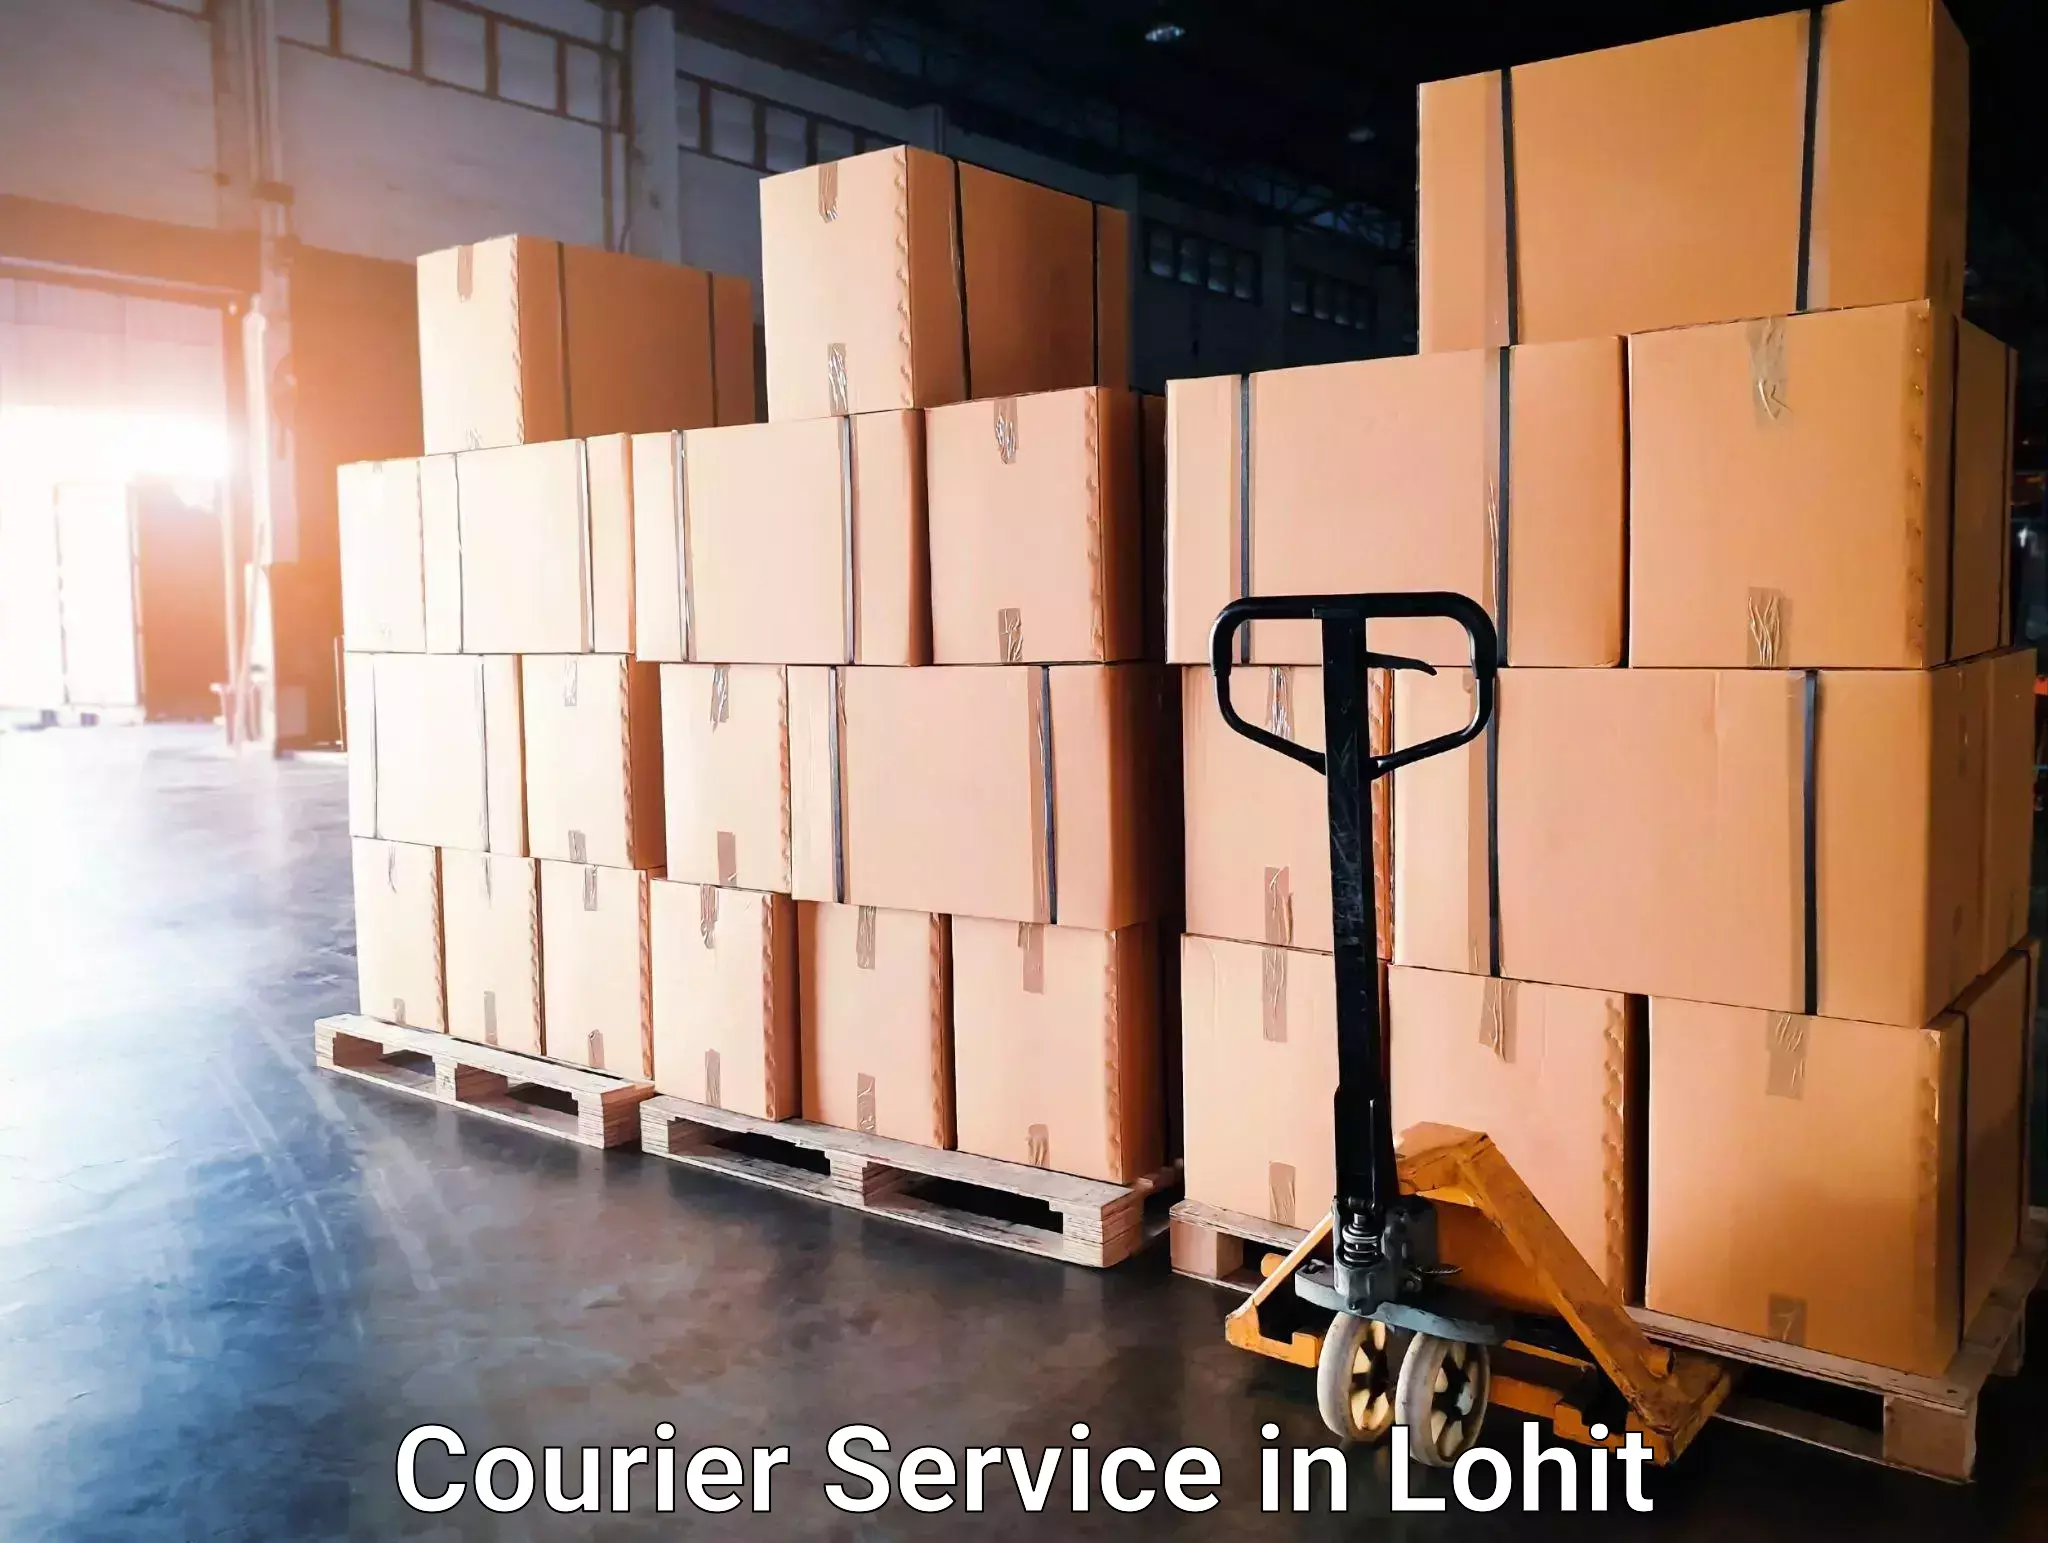 Digital shipping tools in Lohit